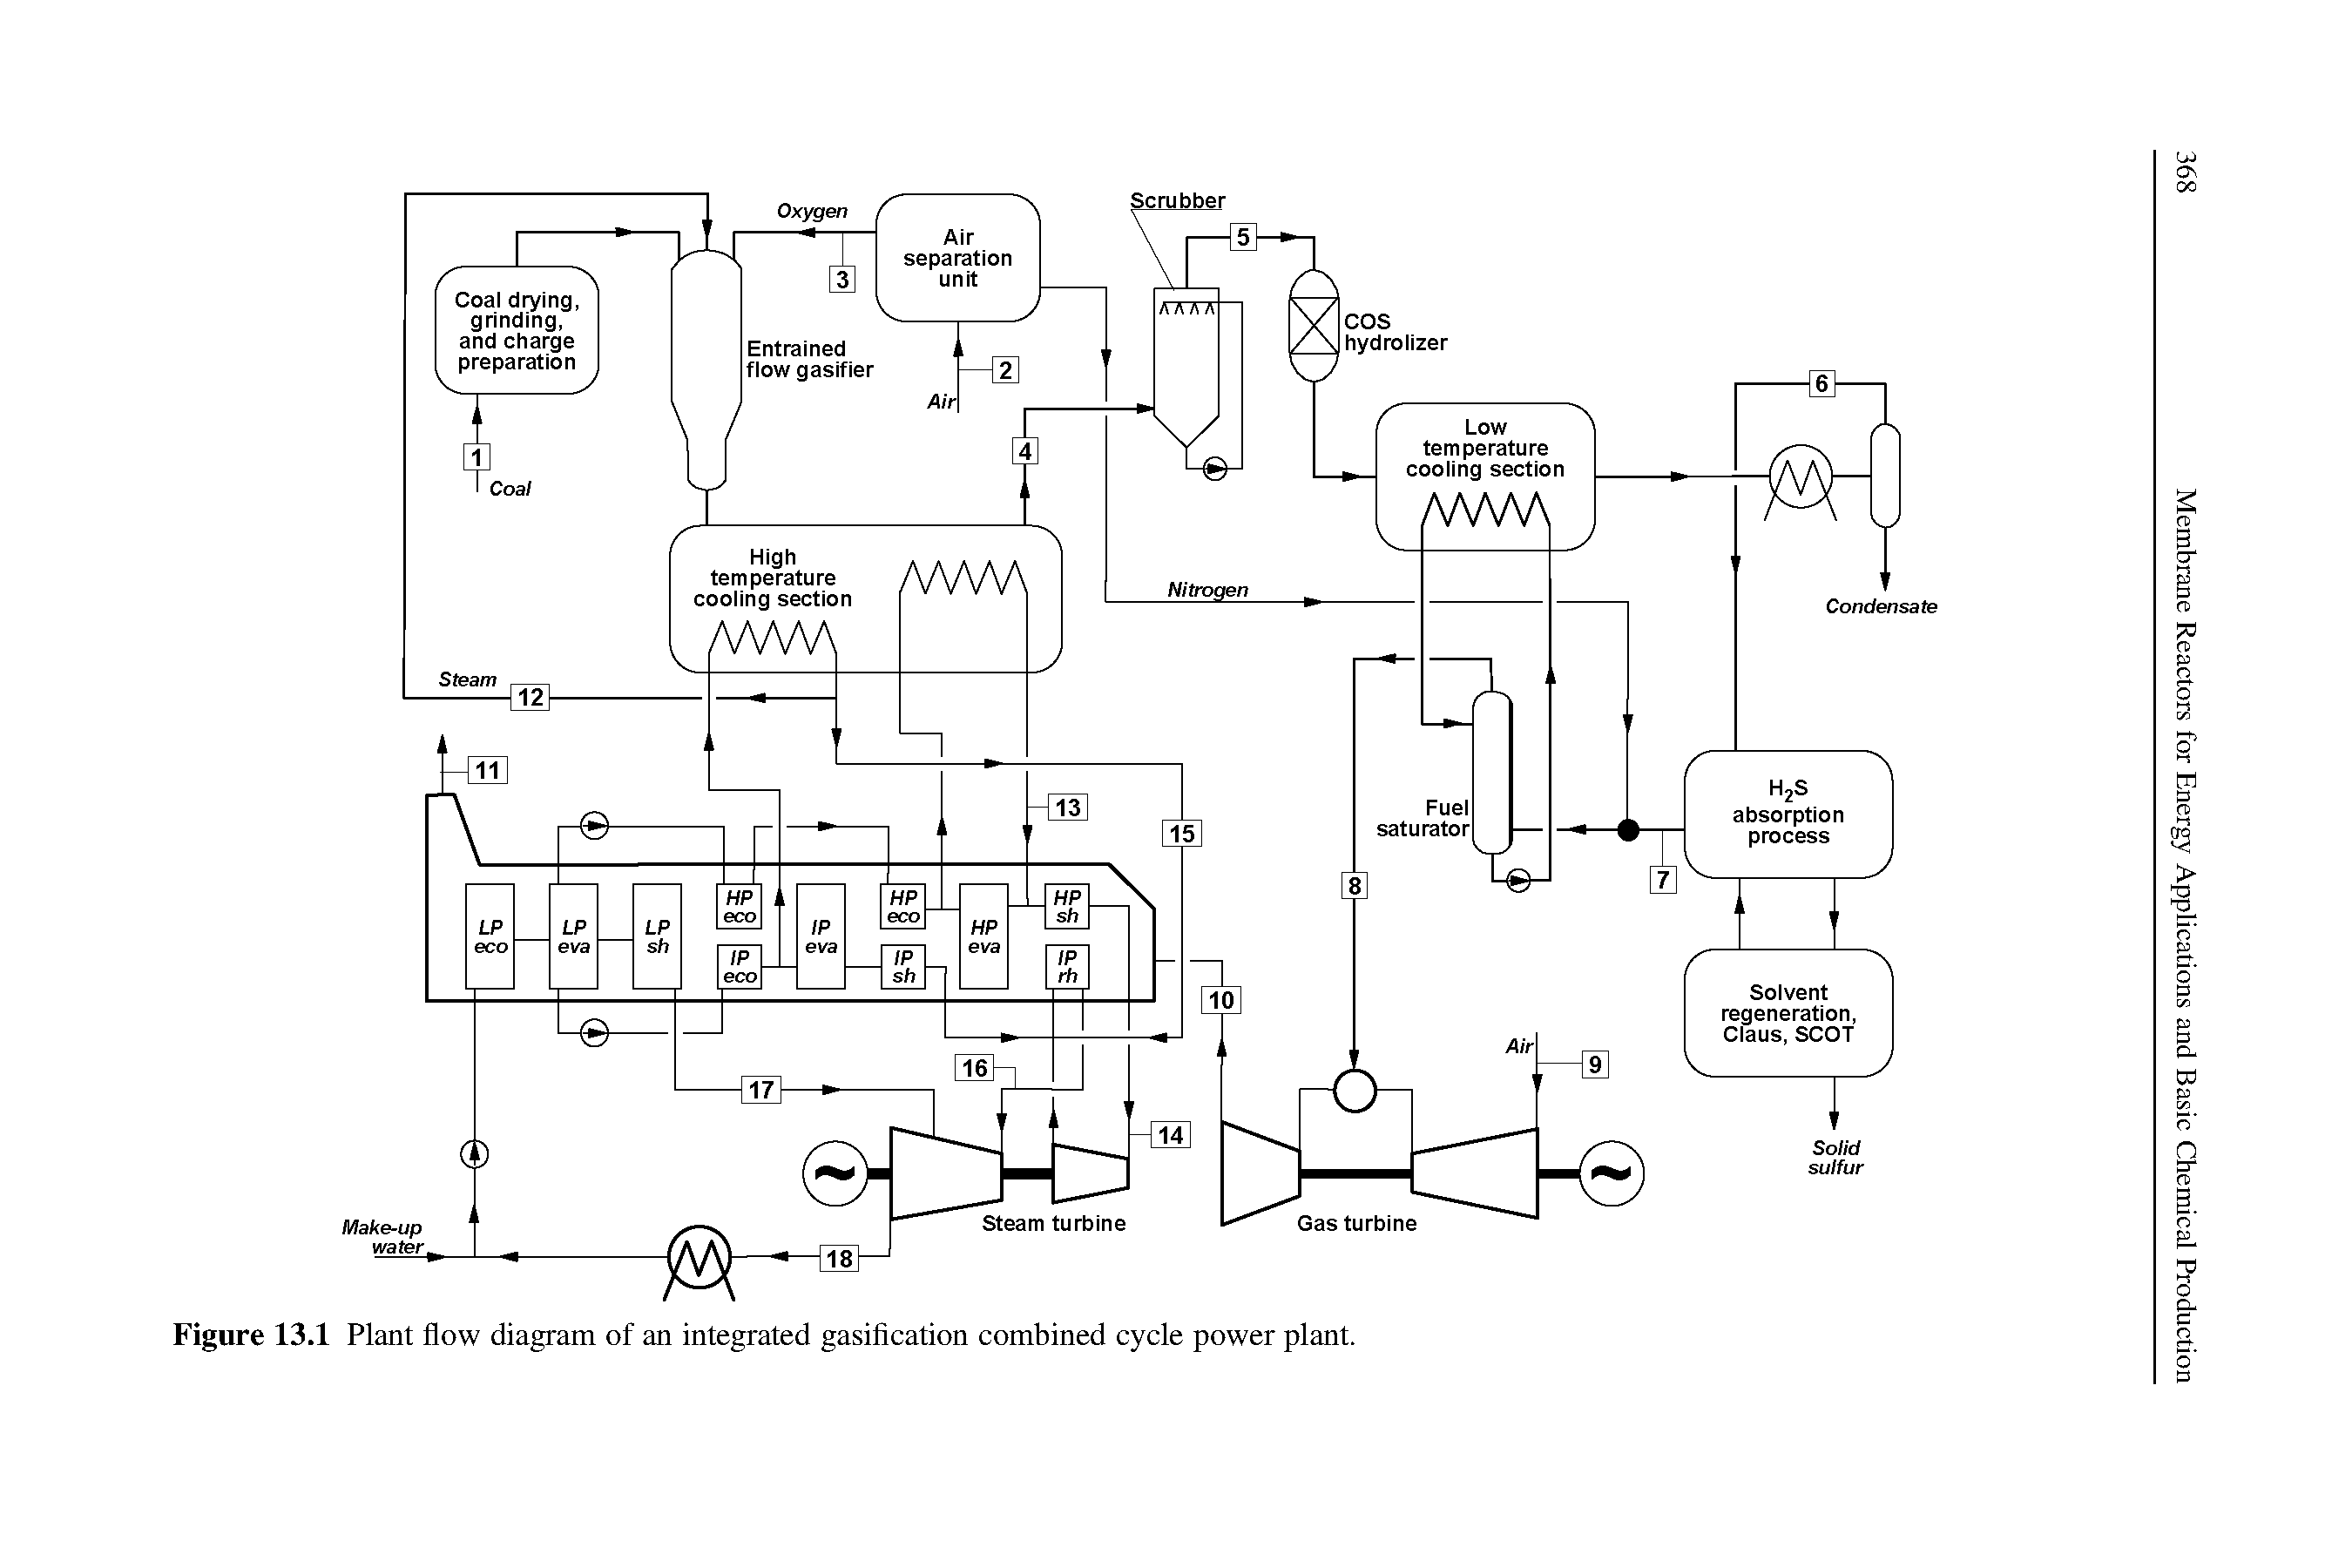 Figure 13.1 Plant flow diagram of an integrated gasification combined cycle power plant.